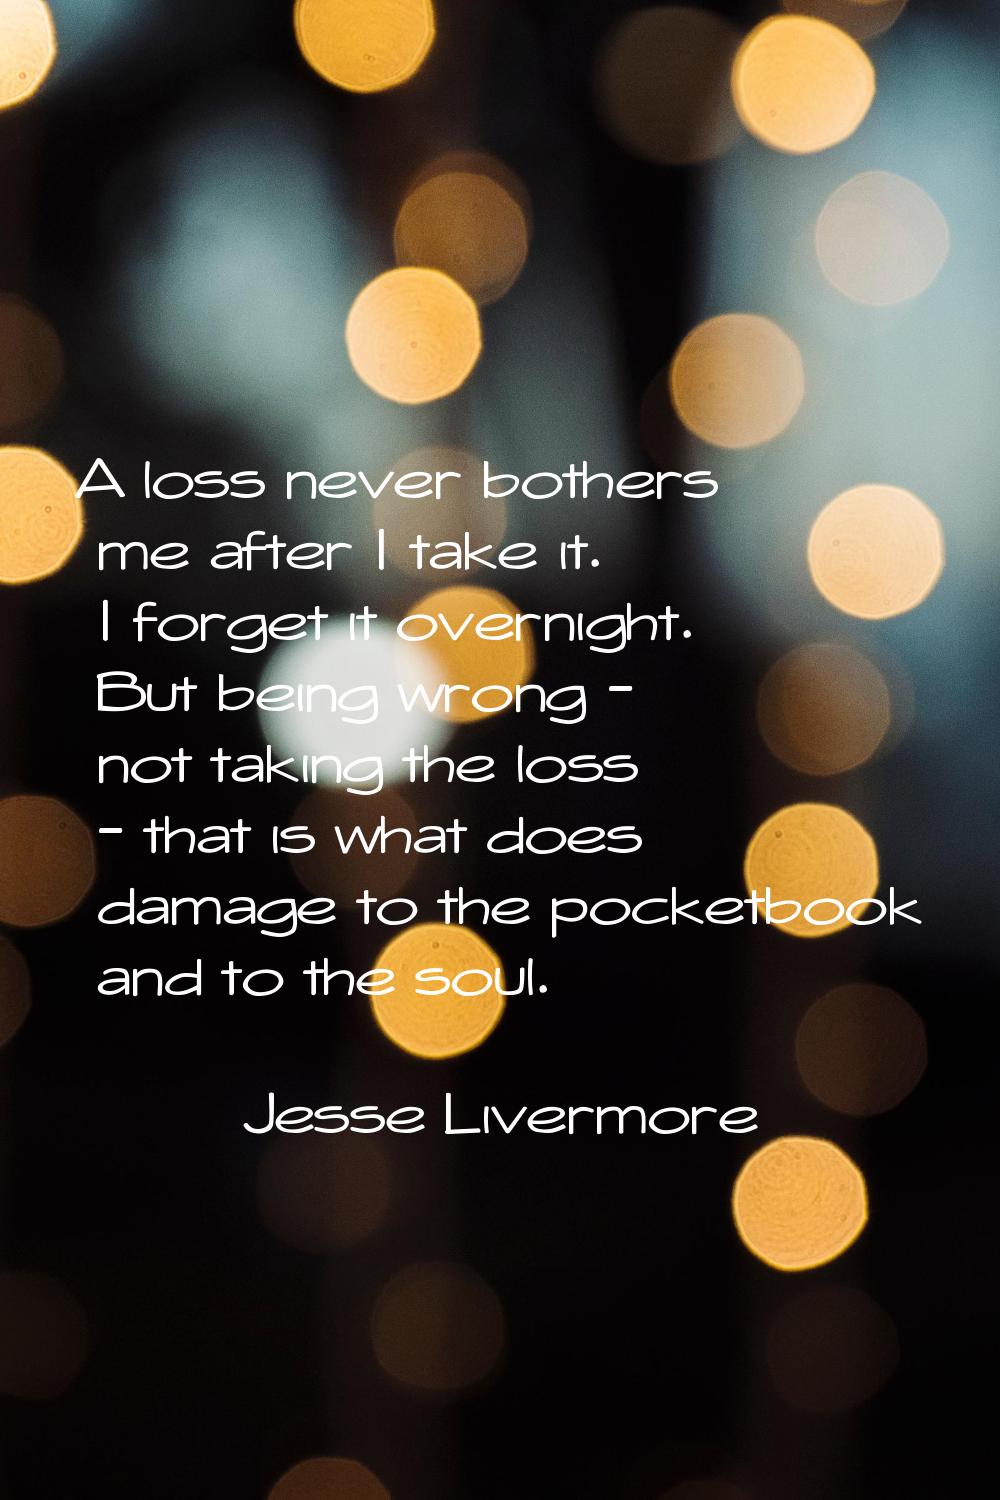 A loss never bothers me after I take it. I forget it overnight. But being wrong - not taking the lo